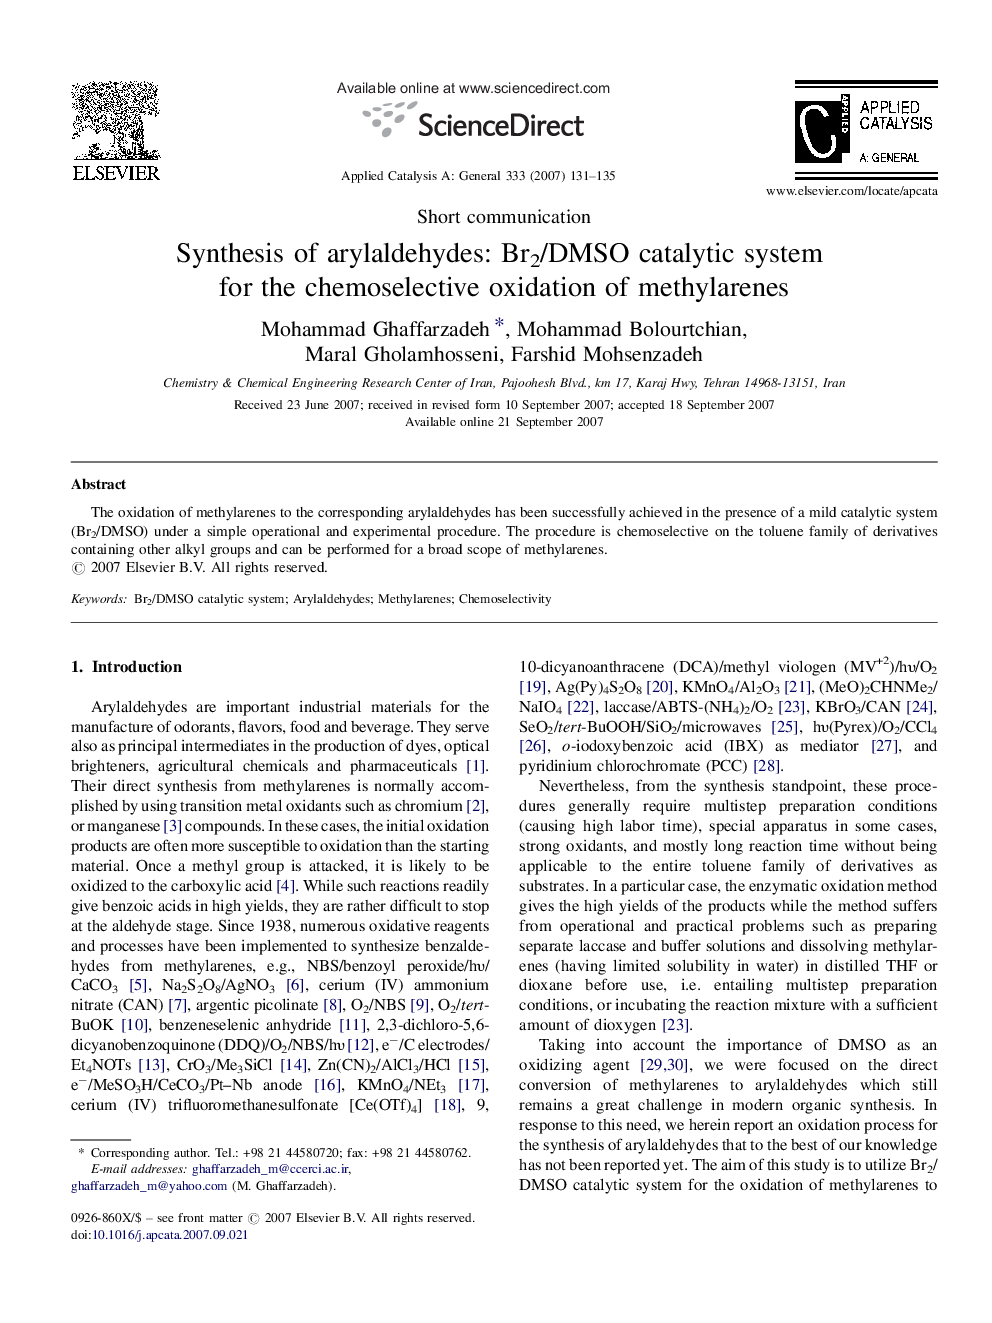 Synthesis of arylaldehydes: Br2/DMSO catalytic system for the chemoselective oxidation of methylarenes